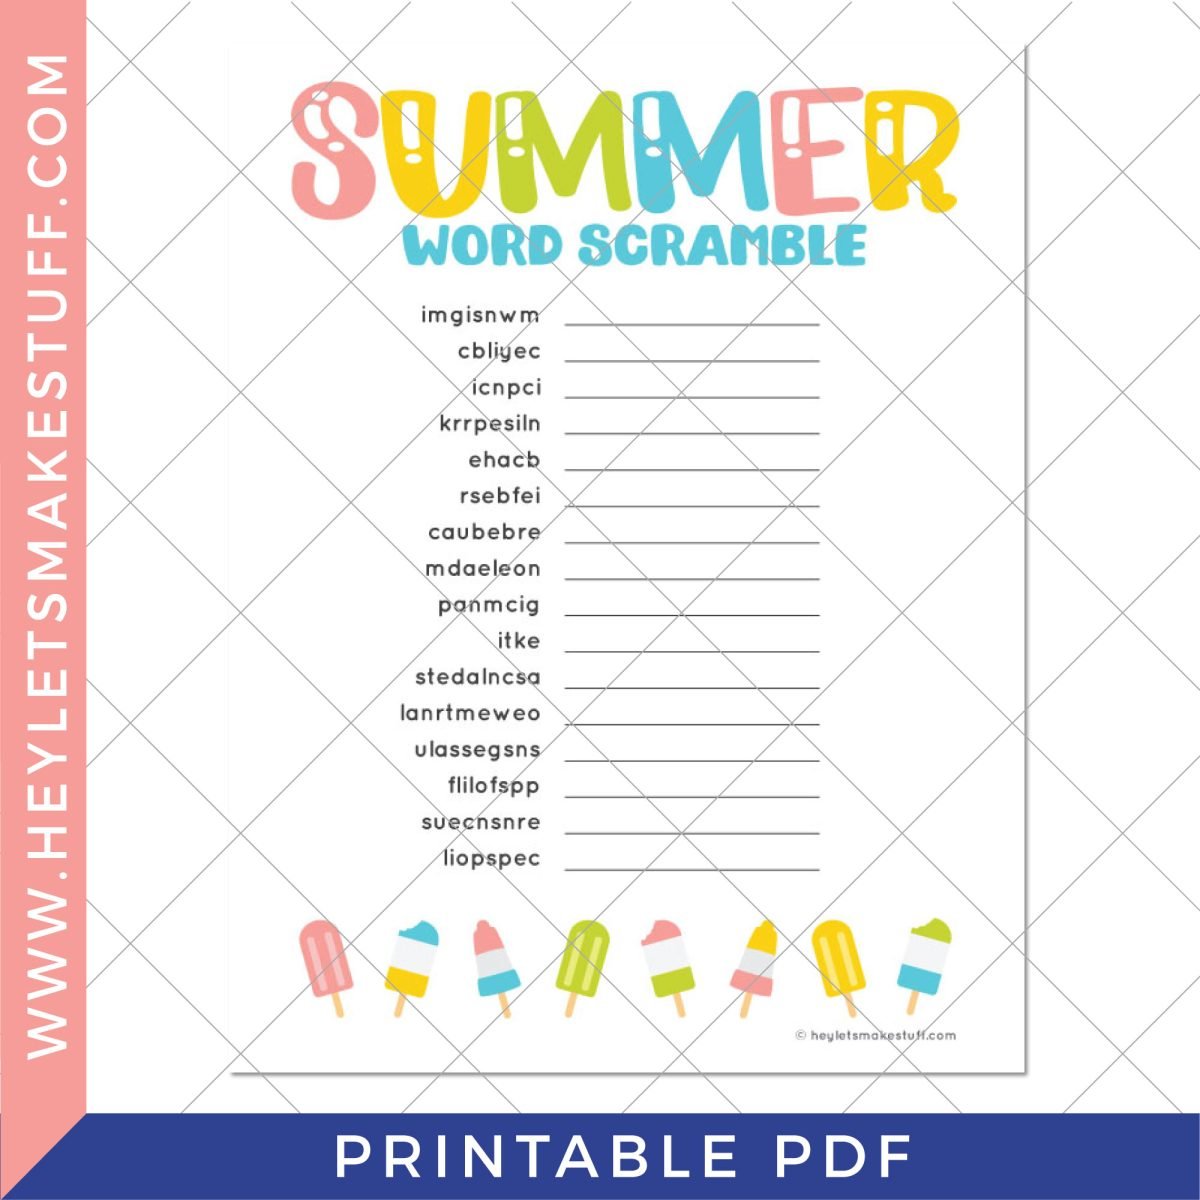 Summer word scramble on security template.